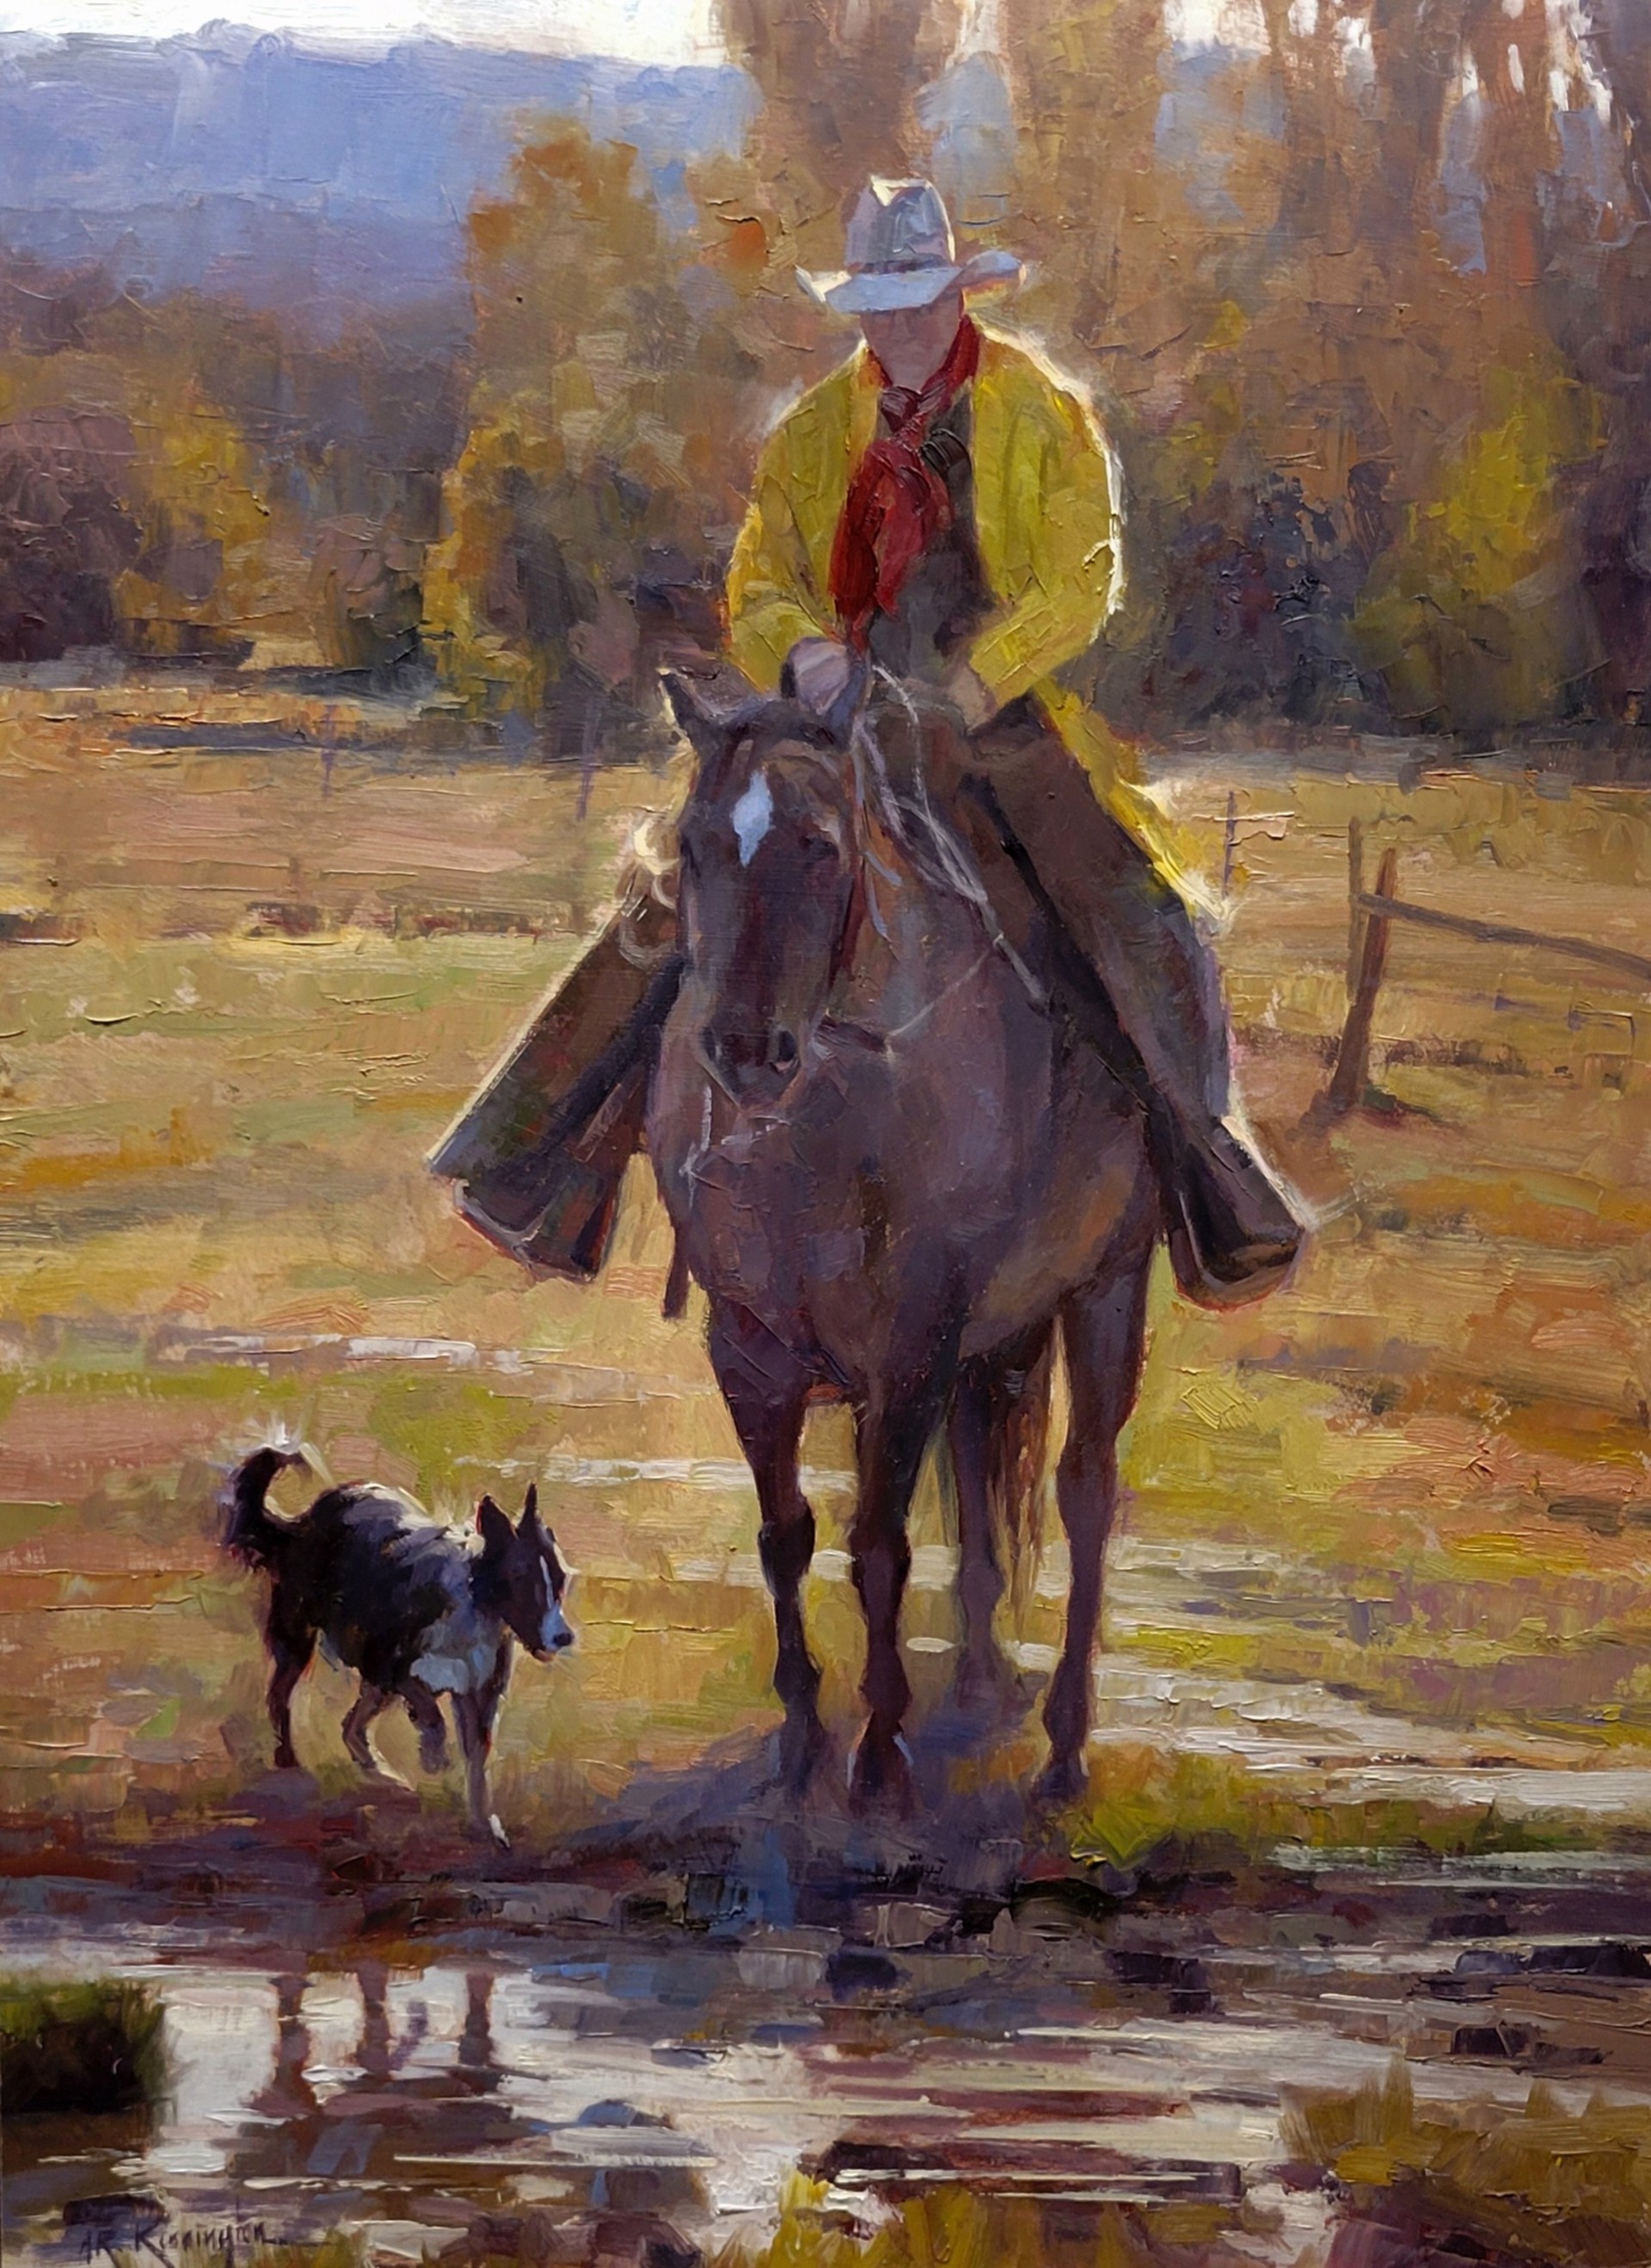 The Ranch Hands by Rick Kennington